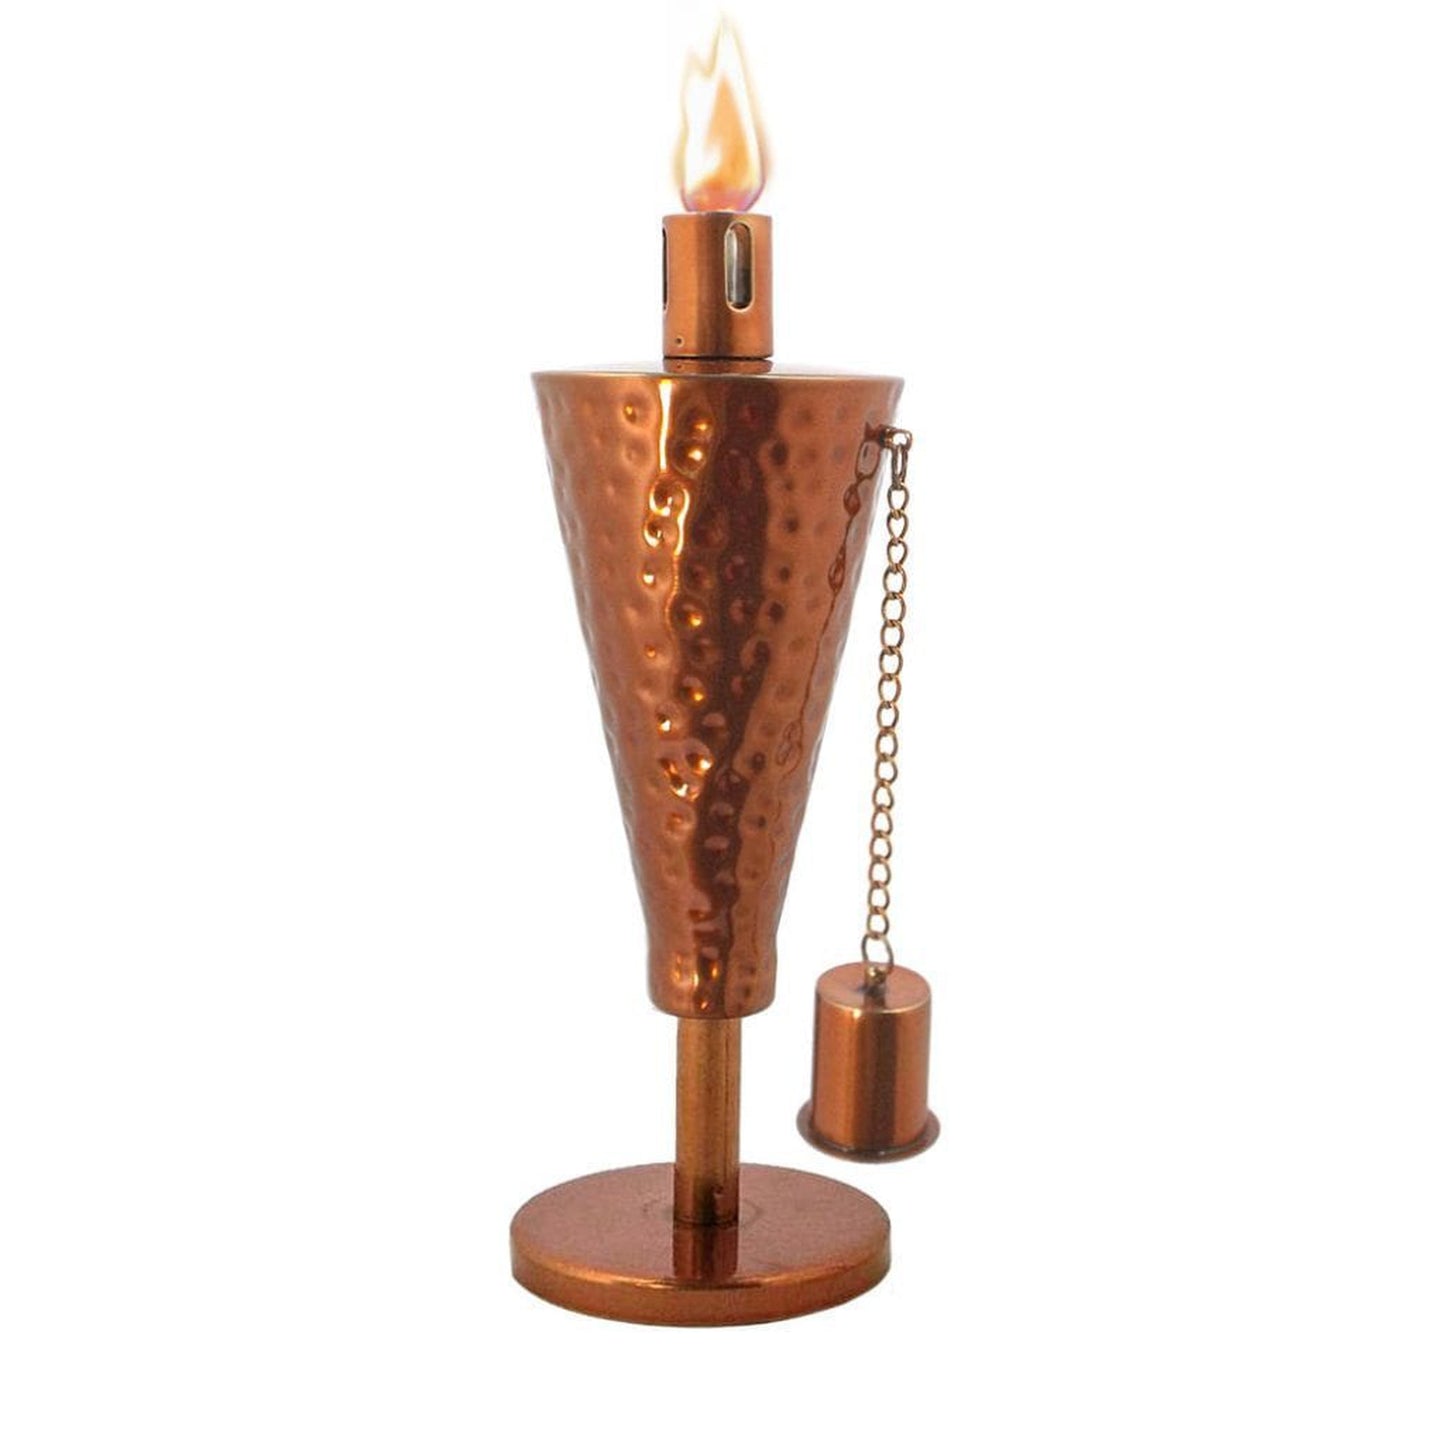 Anywhere Fireplace 10" Copper Garden Torch – Table Top-Hammered Cone (1 pc)